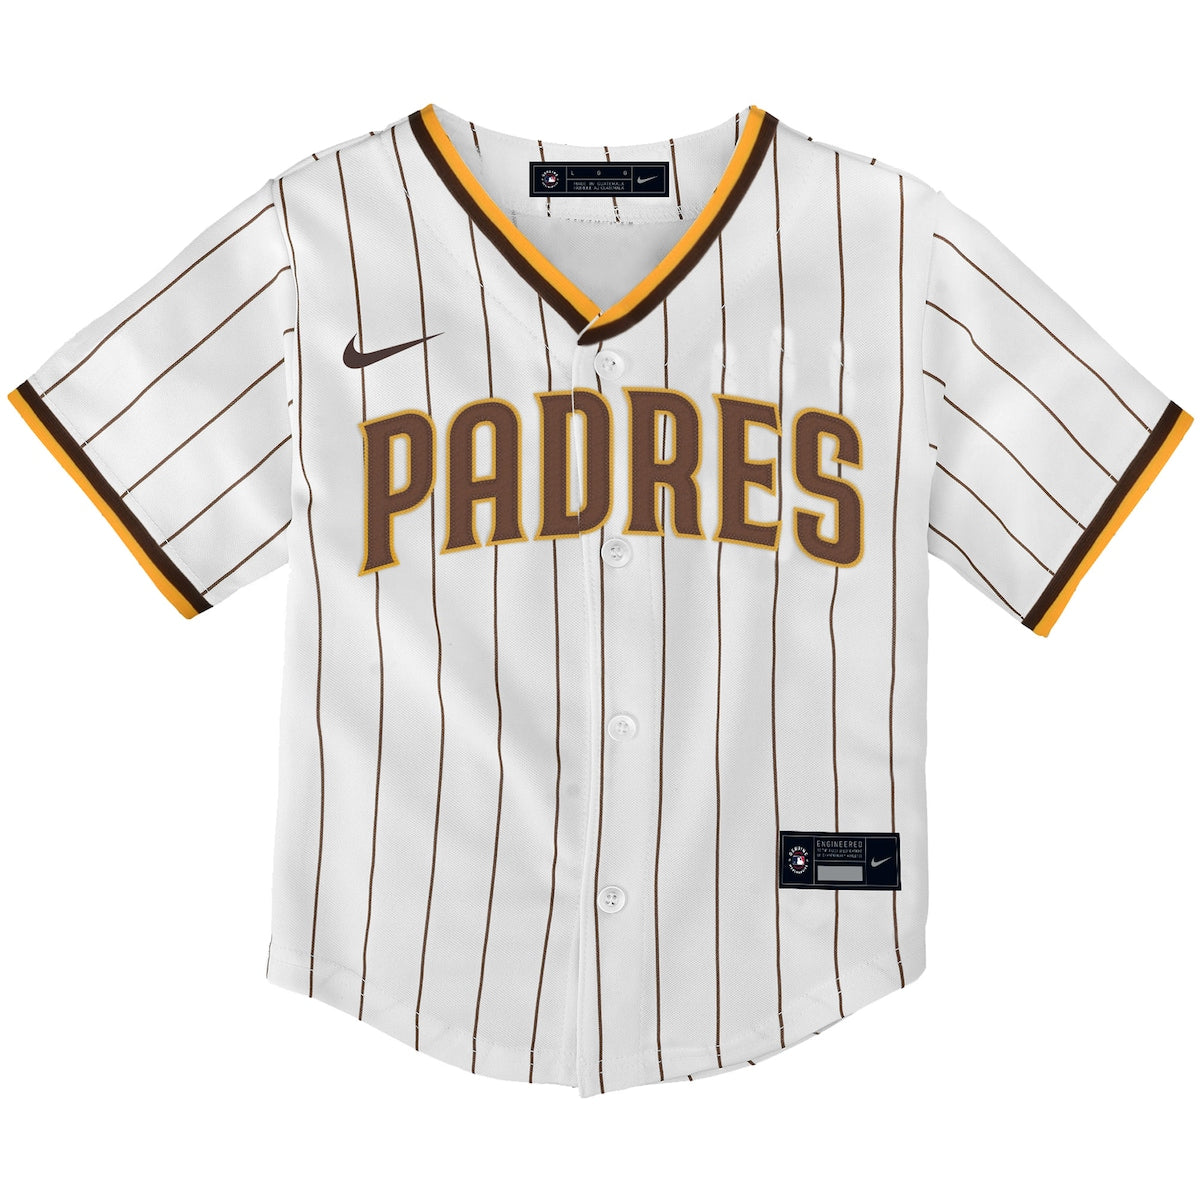 Youth Nike Padres Replica Team Jersey - White – Jerseys Online Sales